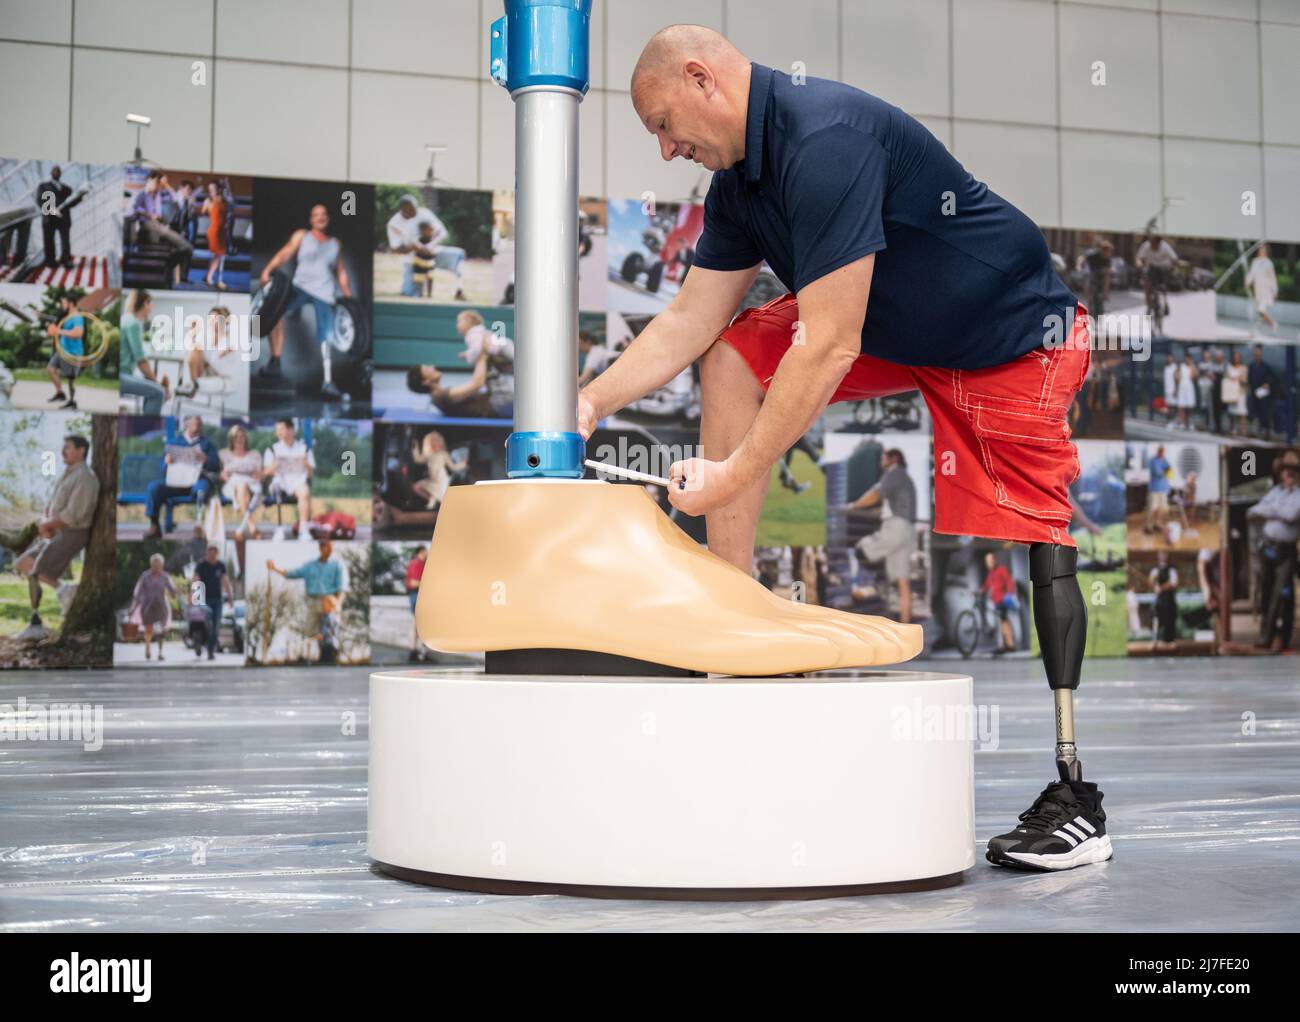 Leipzig, Germany. 09th May, 2022. Mathias Börner, Ottobock sales representative for Saxony and Thuringia, screws on an oversized model of a leg prosthesis. The Duderstadt-based company Ottobock is displaying a four-meter-high model of the C-Leg leg prosthesis to mark its 25th anniversary at OTWorld 2022, the world's leading trade fair for orthopaedic and rehabilitation technology. It was the world's first mechatronic knee joint. The C-Leg technology has now been used in more than 100,000 fittings worldwide. Credit: Christian Modla/dpa/Alamy Live News Stock Photo